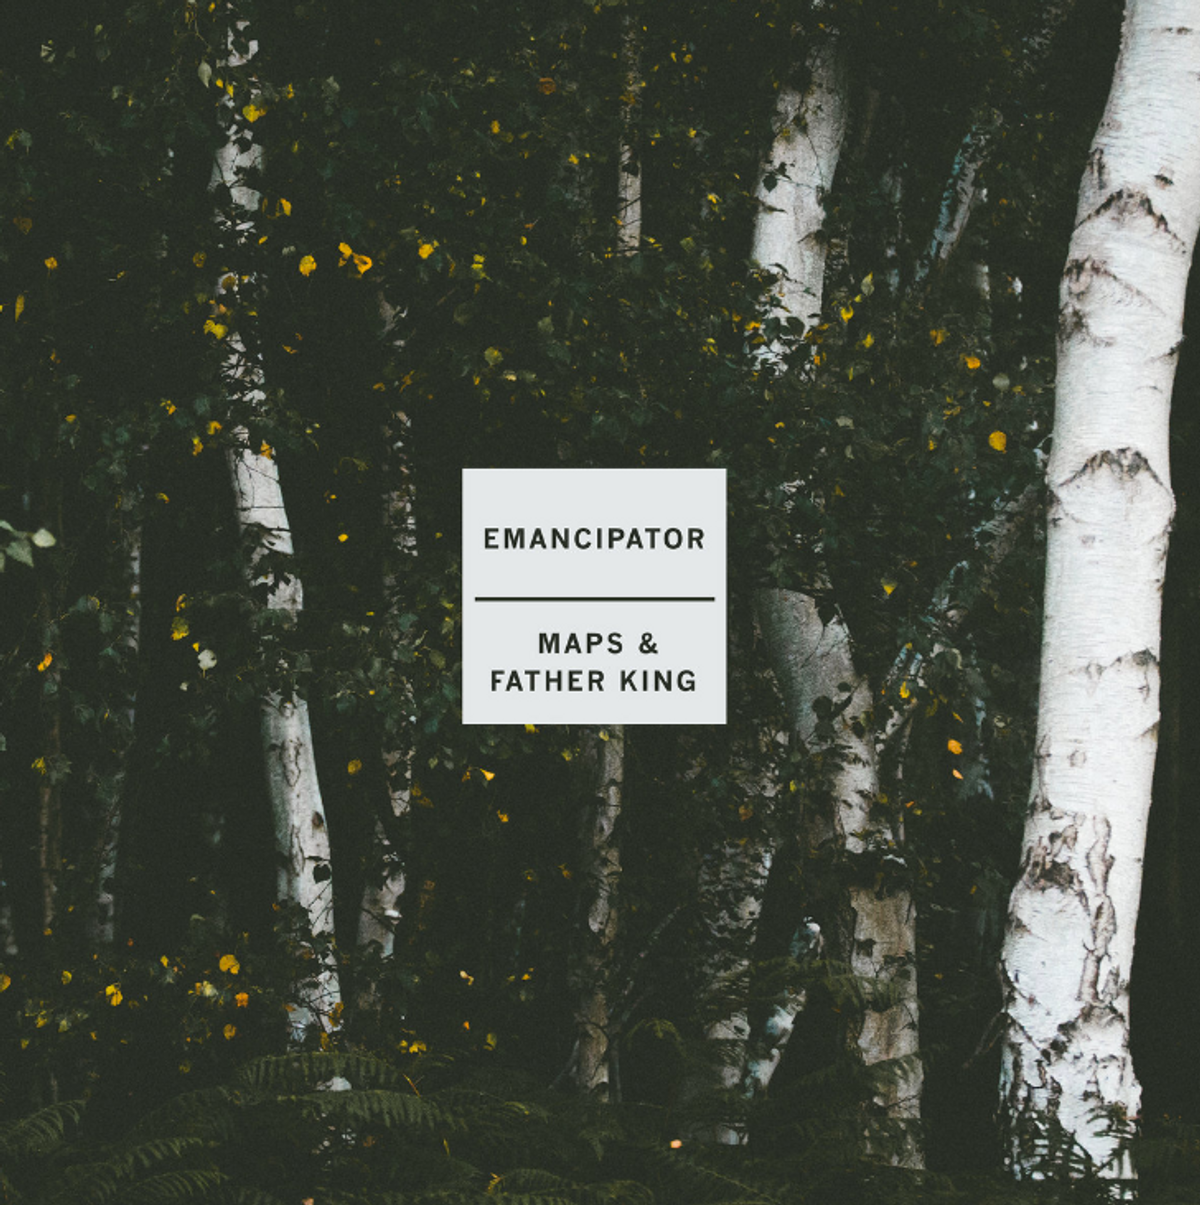 Emancipator Releases New EP, "Maps & Father King" Featuring Remixes From Star Slinger, Kodak To Graph, Catching Flies, and Imagine Herbal Flows